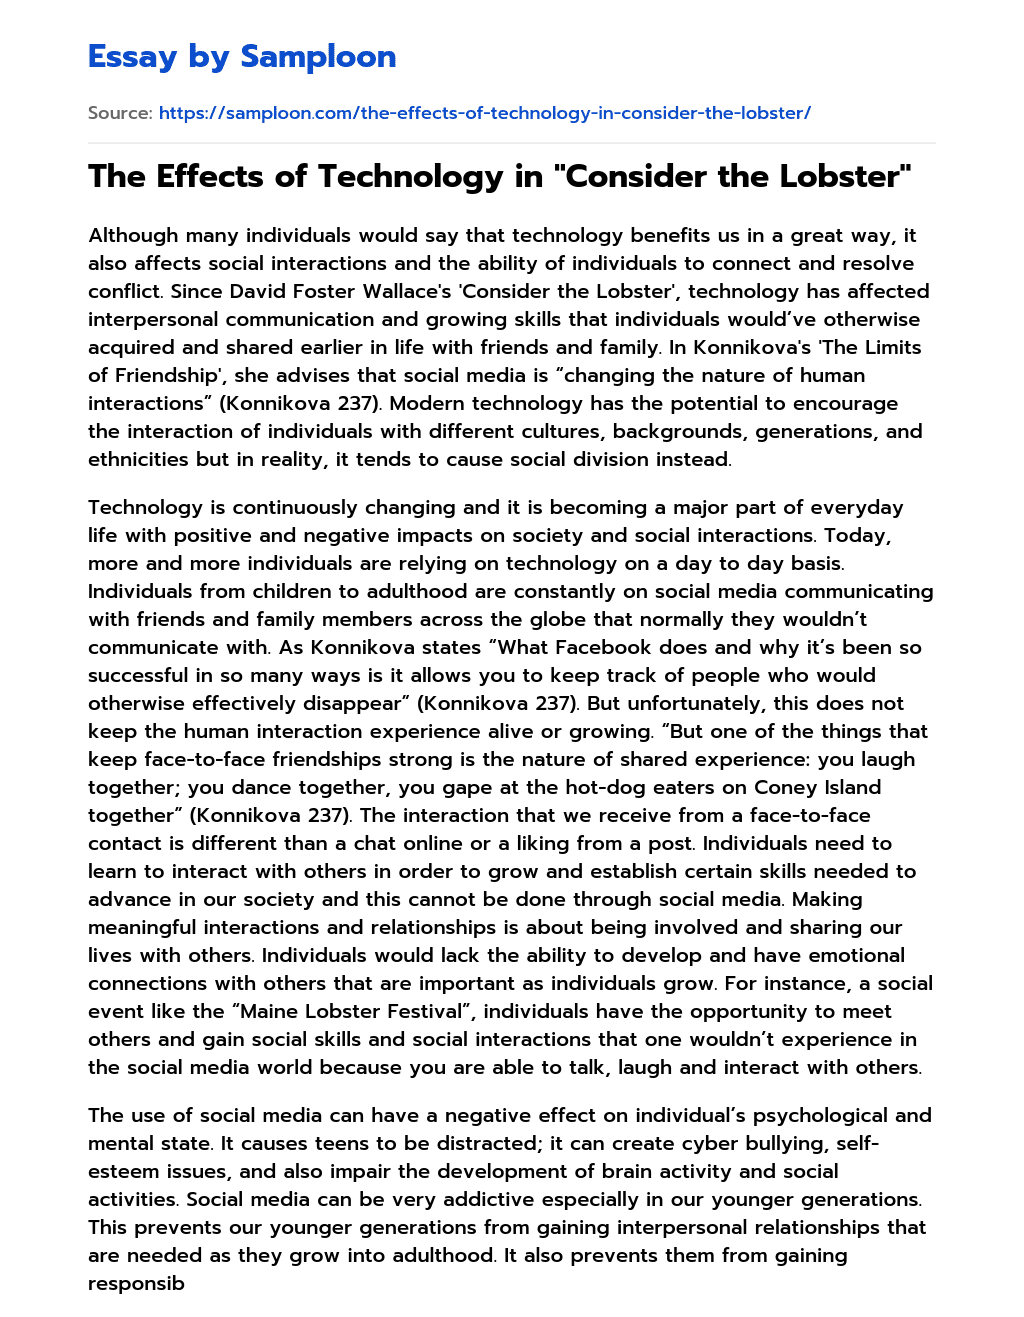 The Effects of Technology in “Consider the Lobster” essay